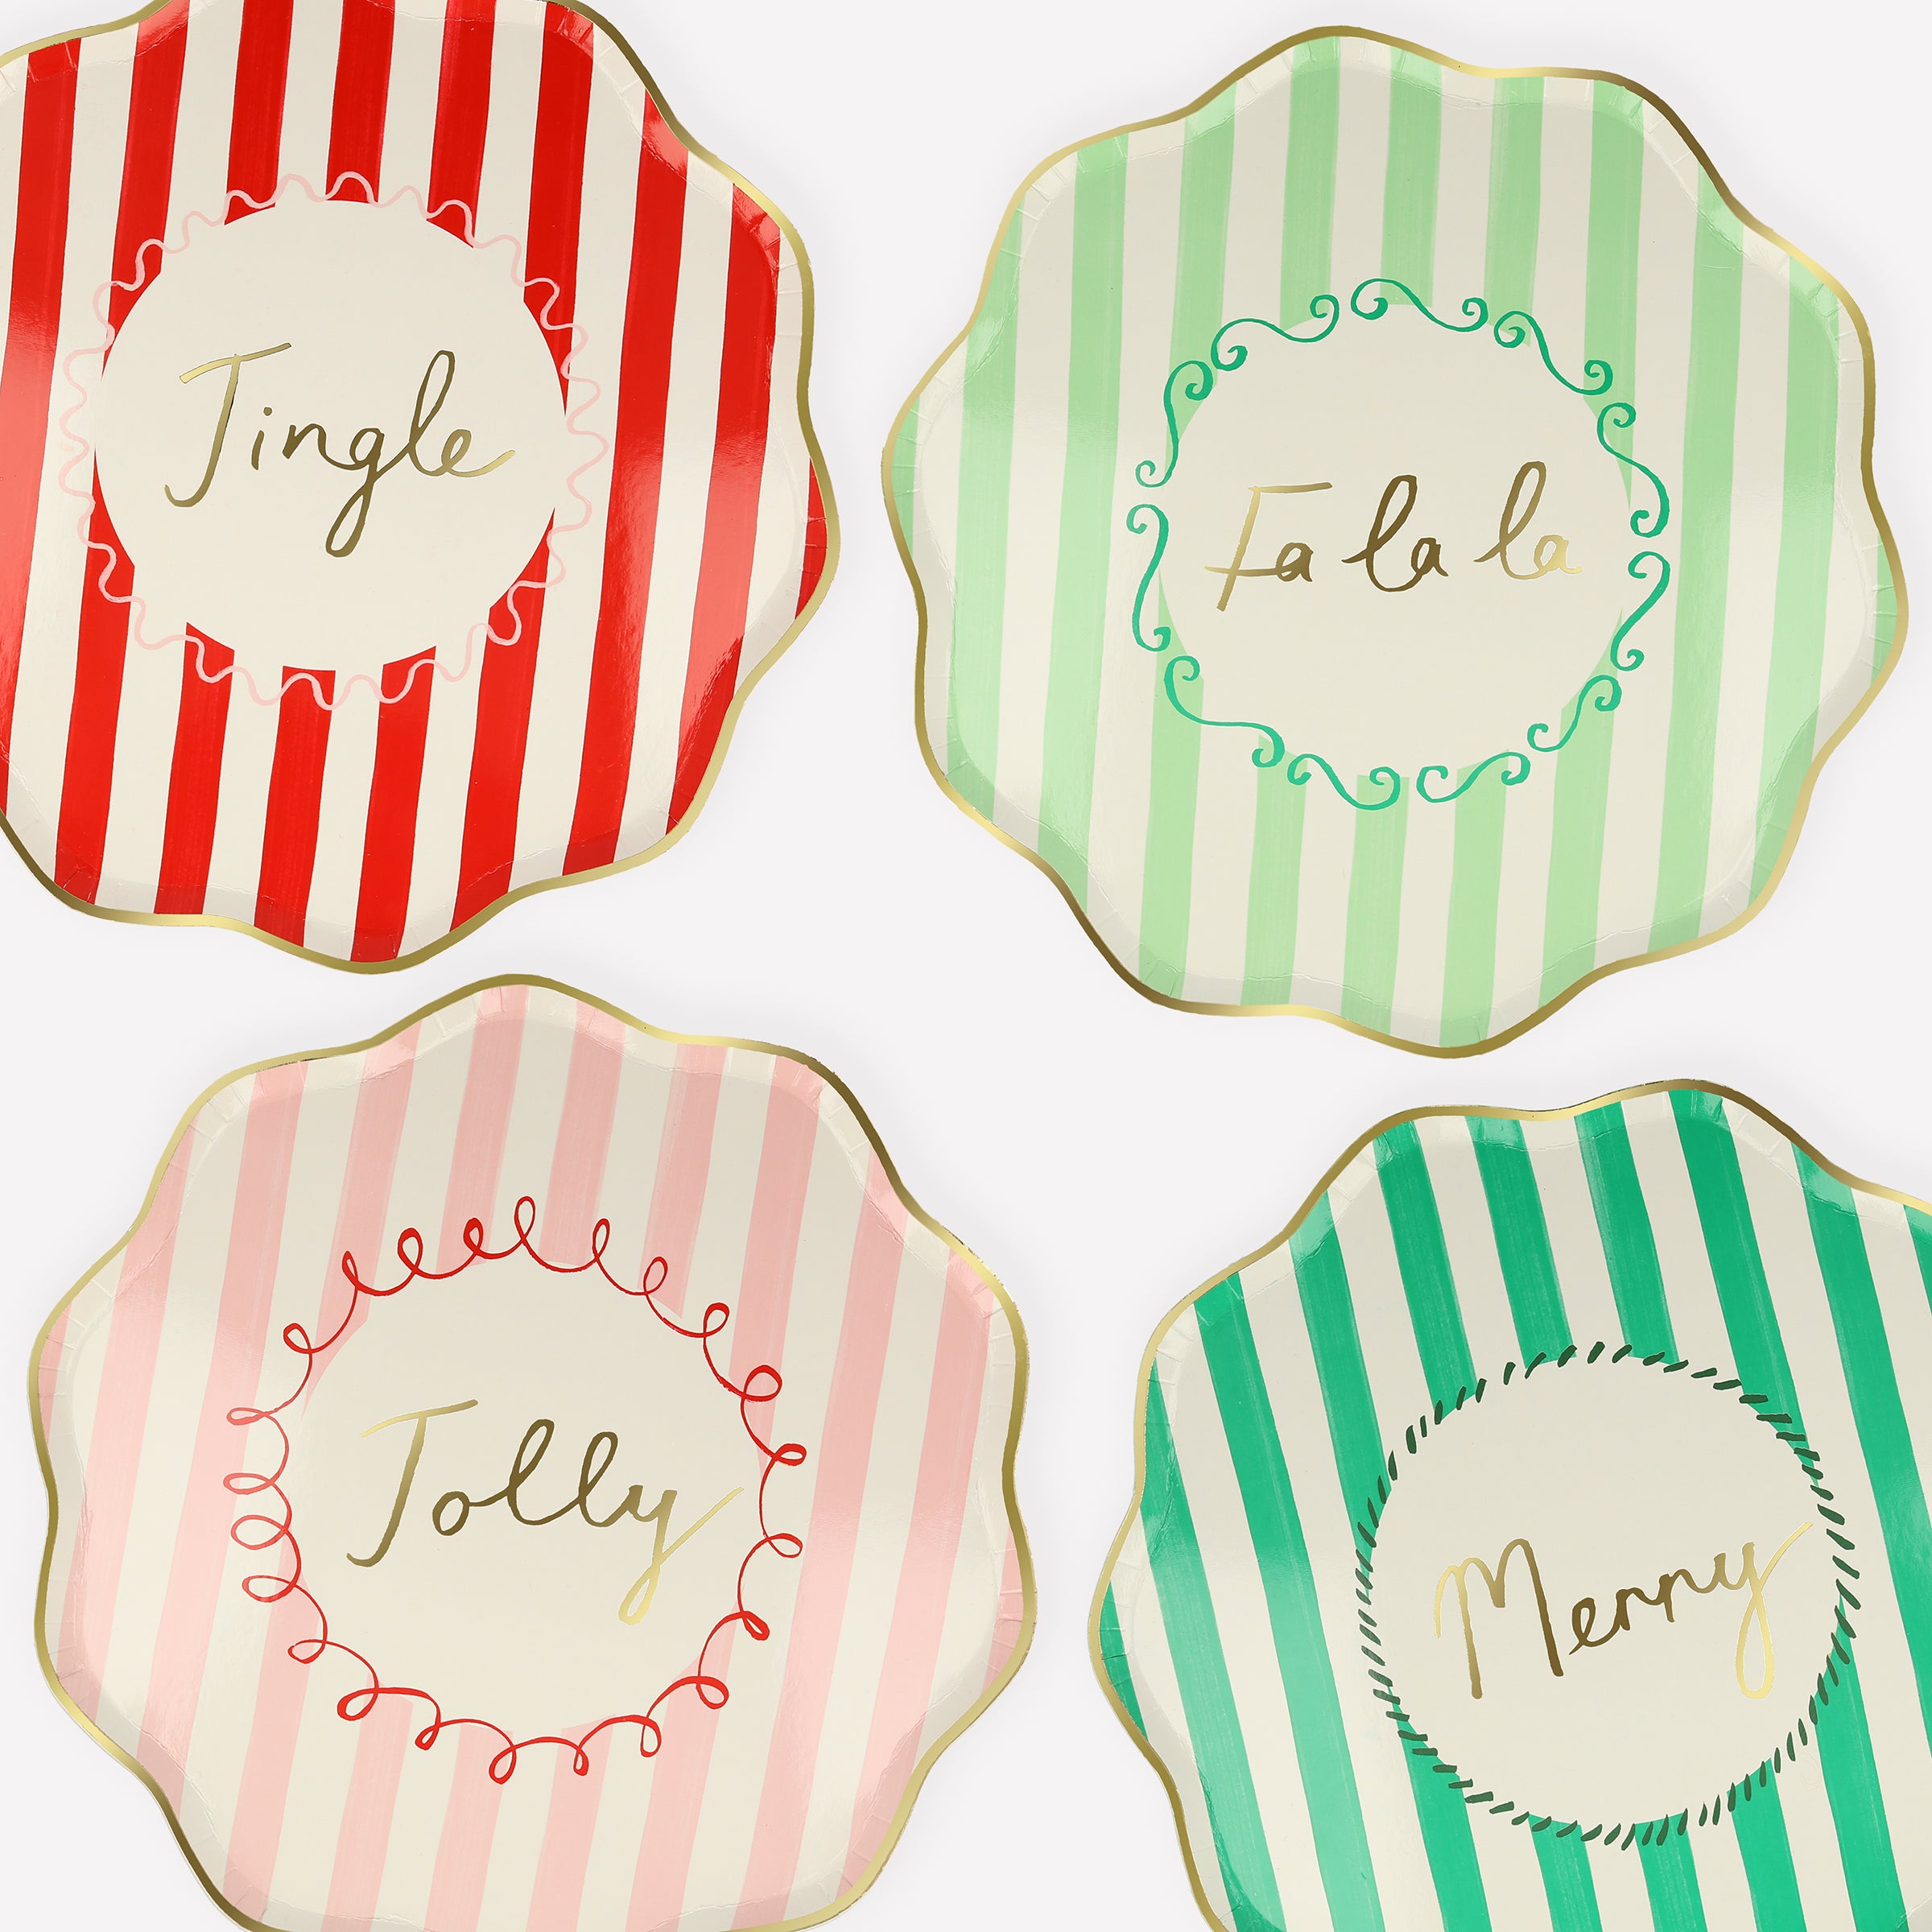 These striped plates are perfect for a stylish Christmas party.